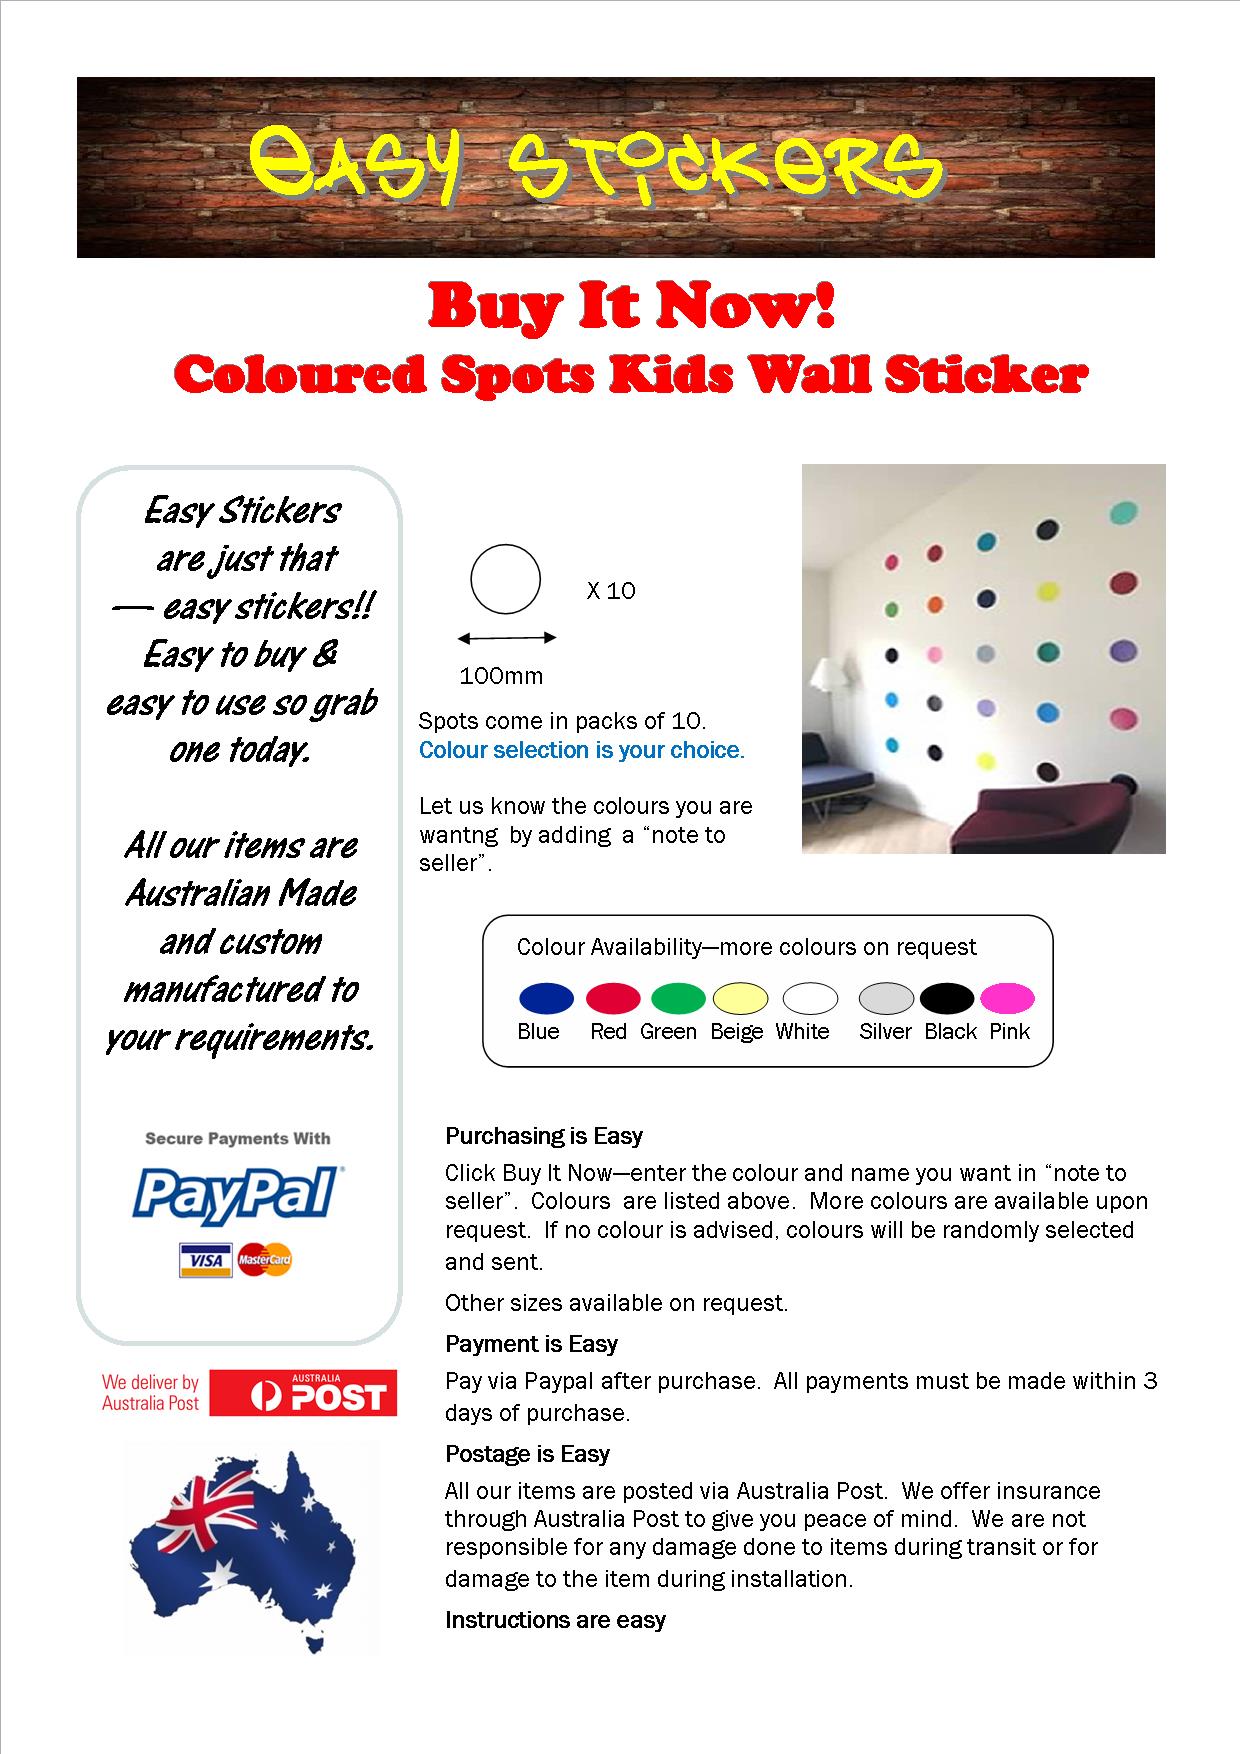 Ebay Template 100mm coloured spots.jpg  by easystickers